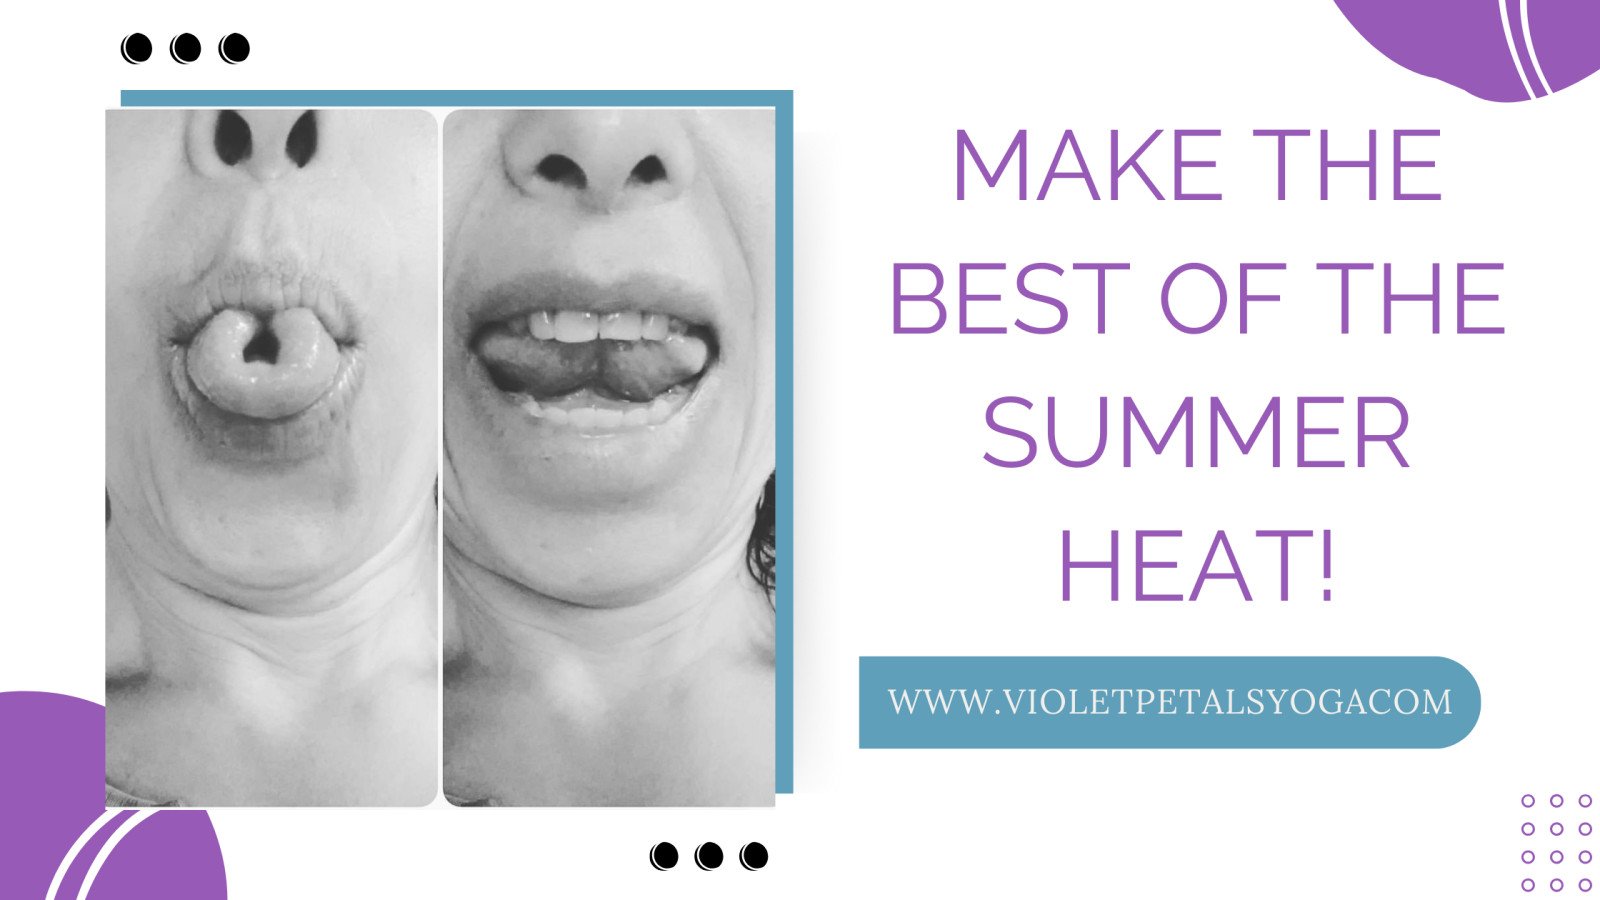 Make the best of the Summer HEAT!